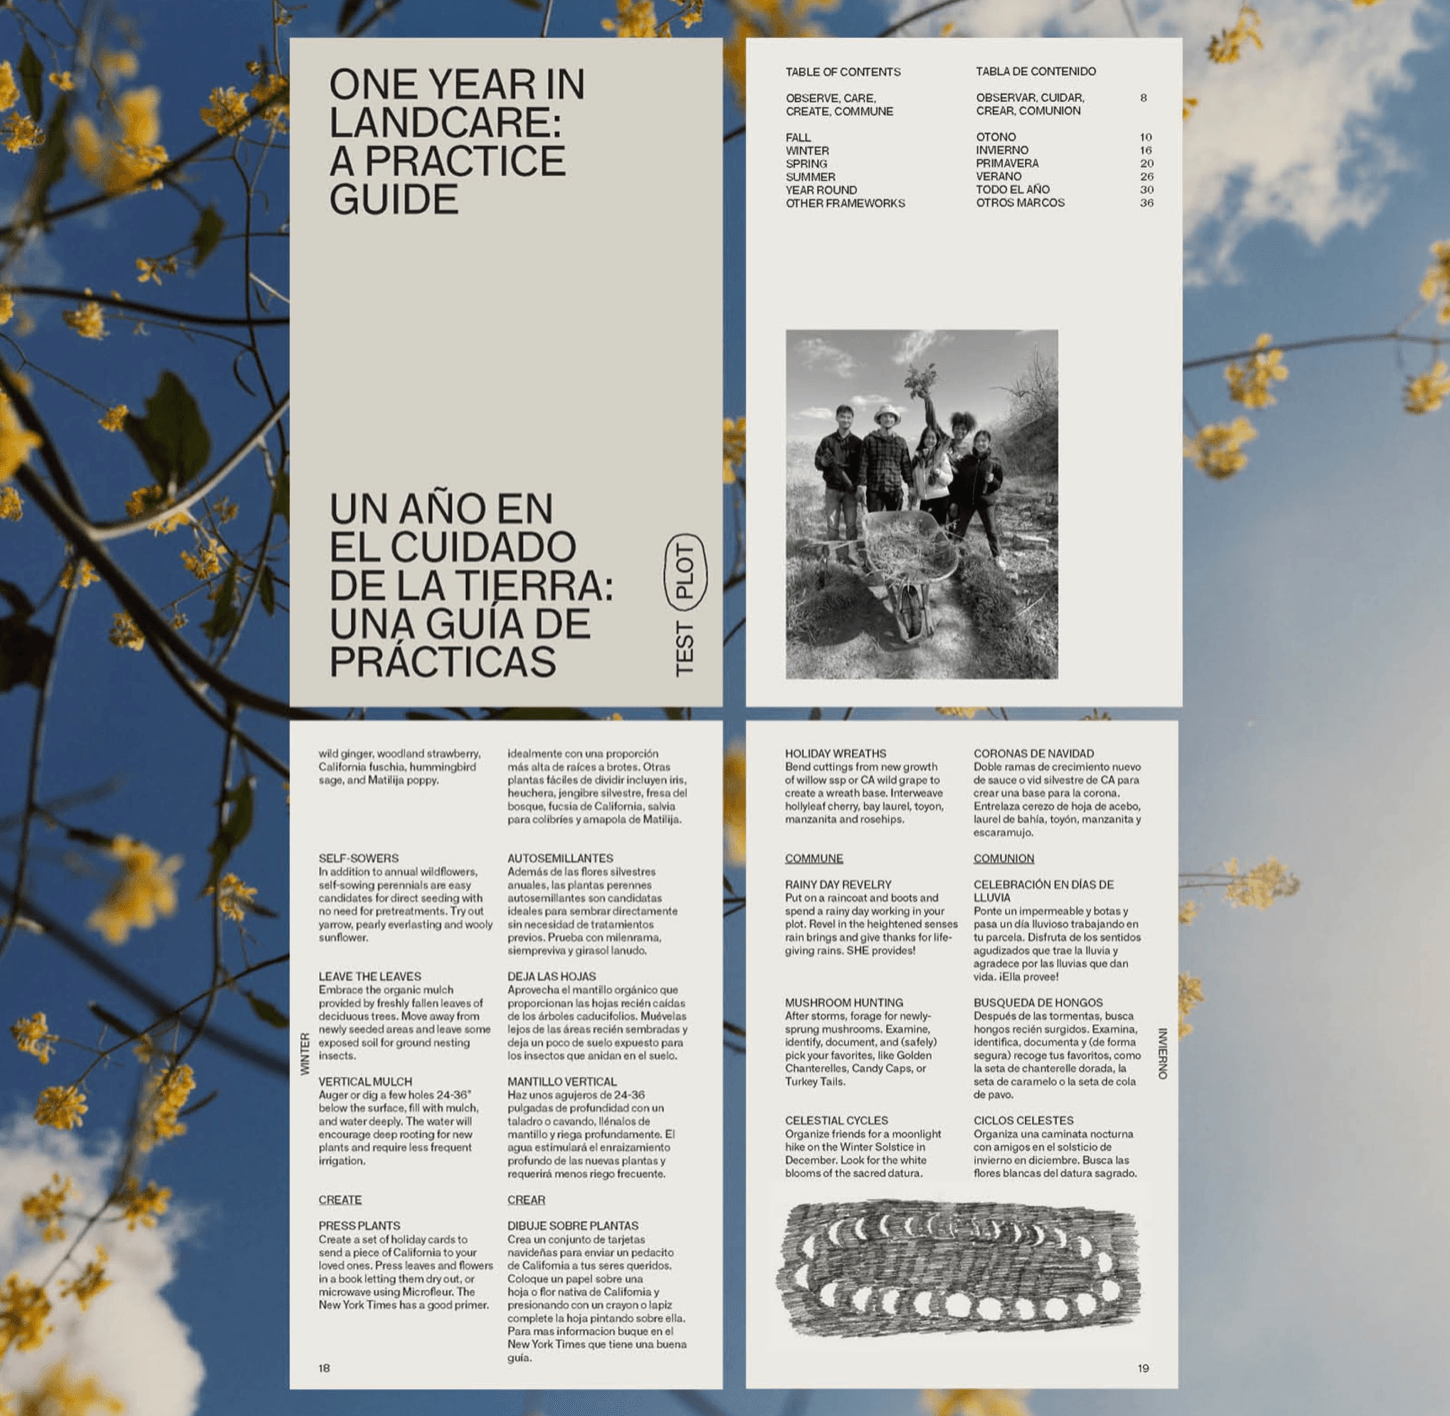 Test Plot - A year in Landcare: A Practice Guide. - Ensemble Studios